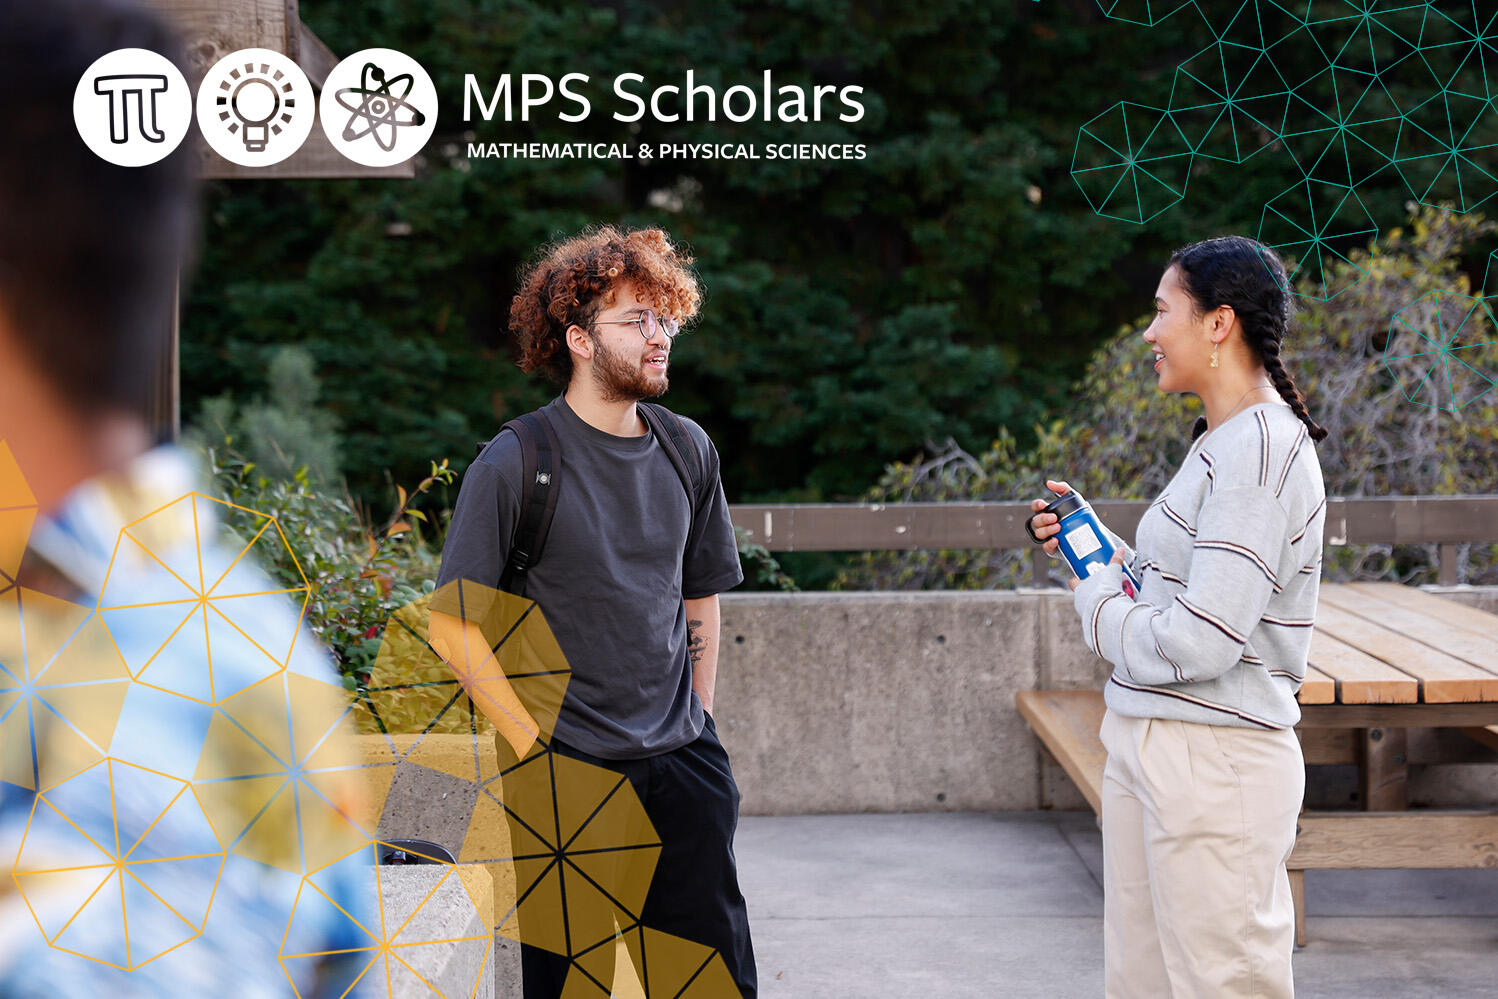 Students chatting on campus with MPS Scholars logo